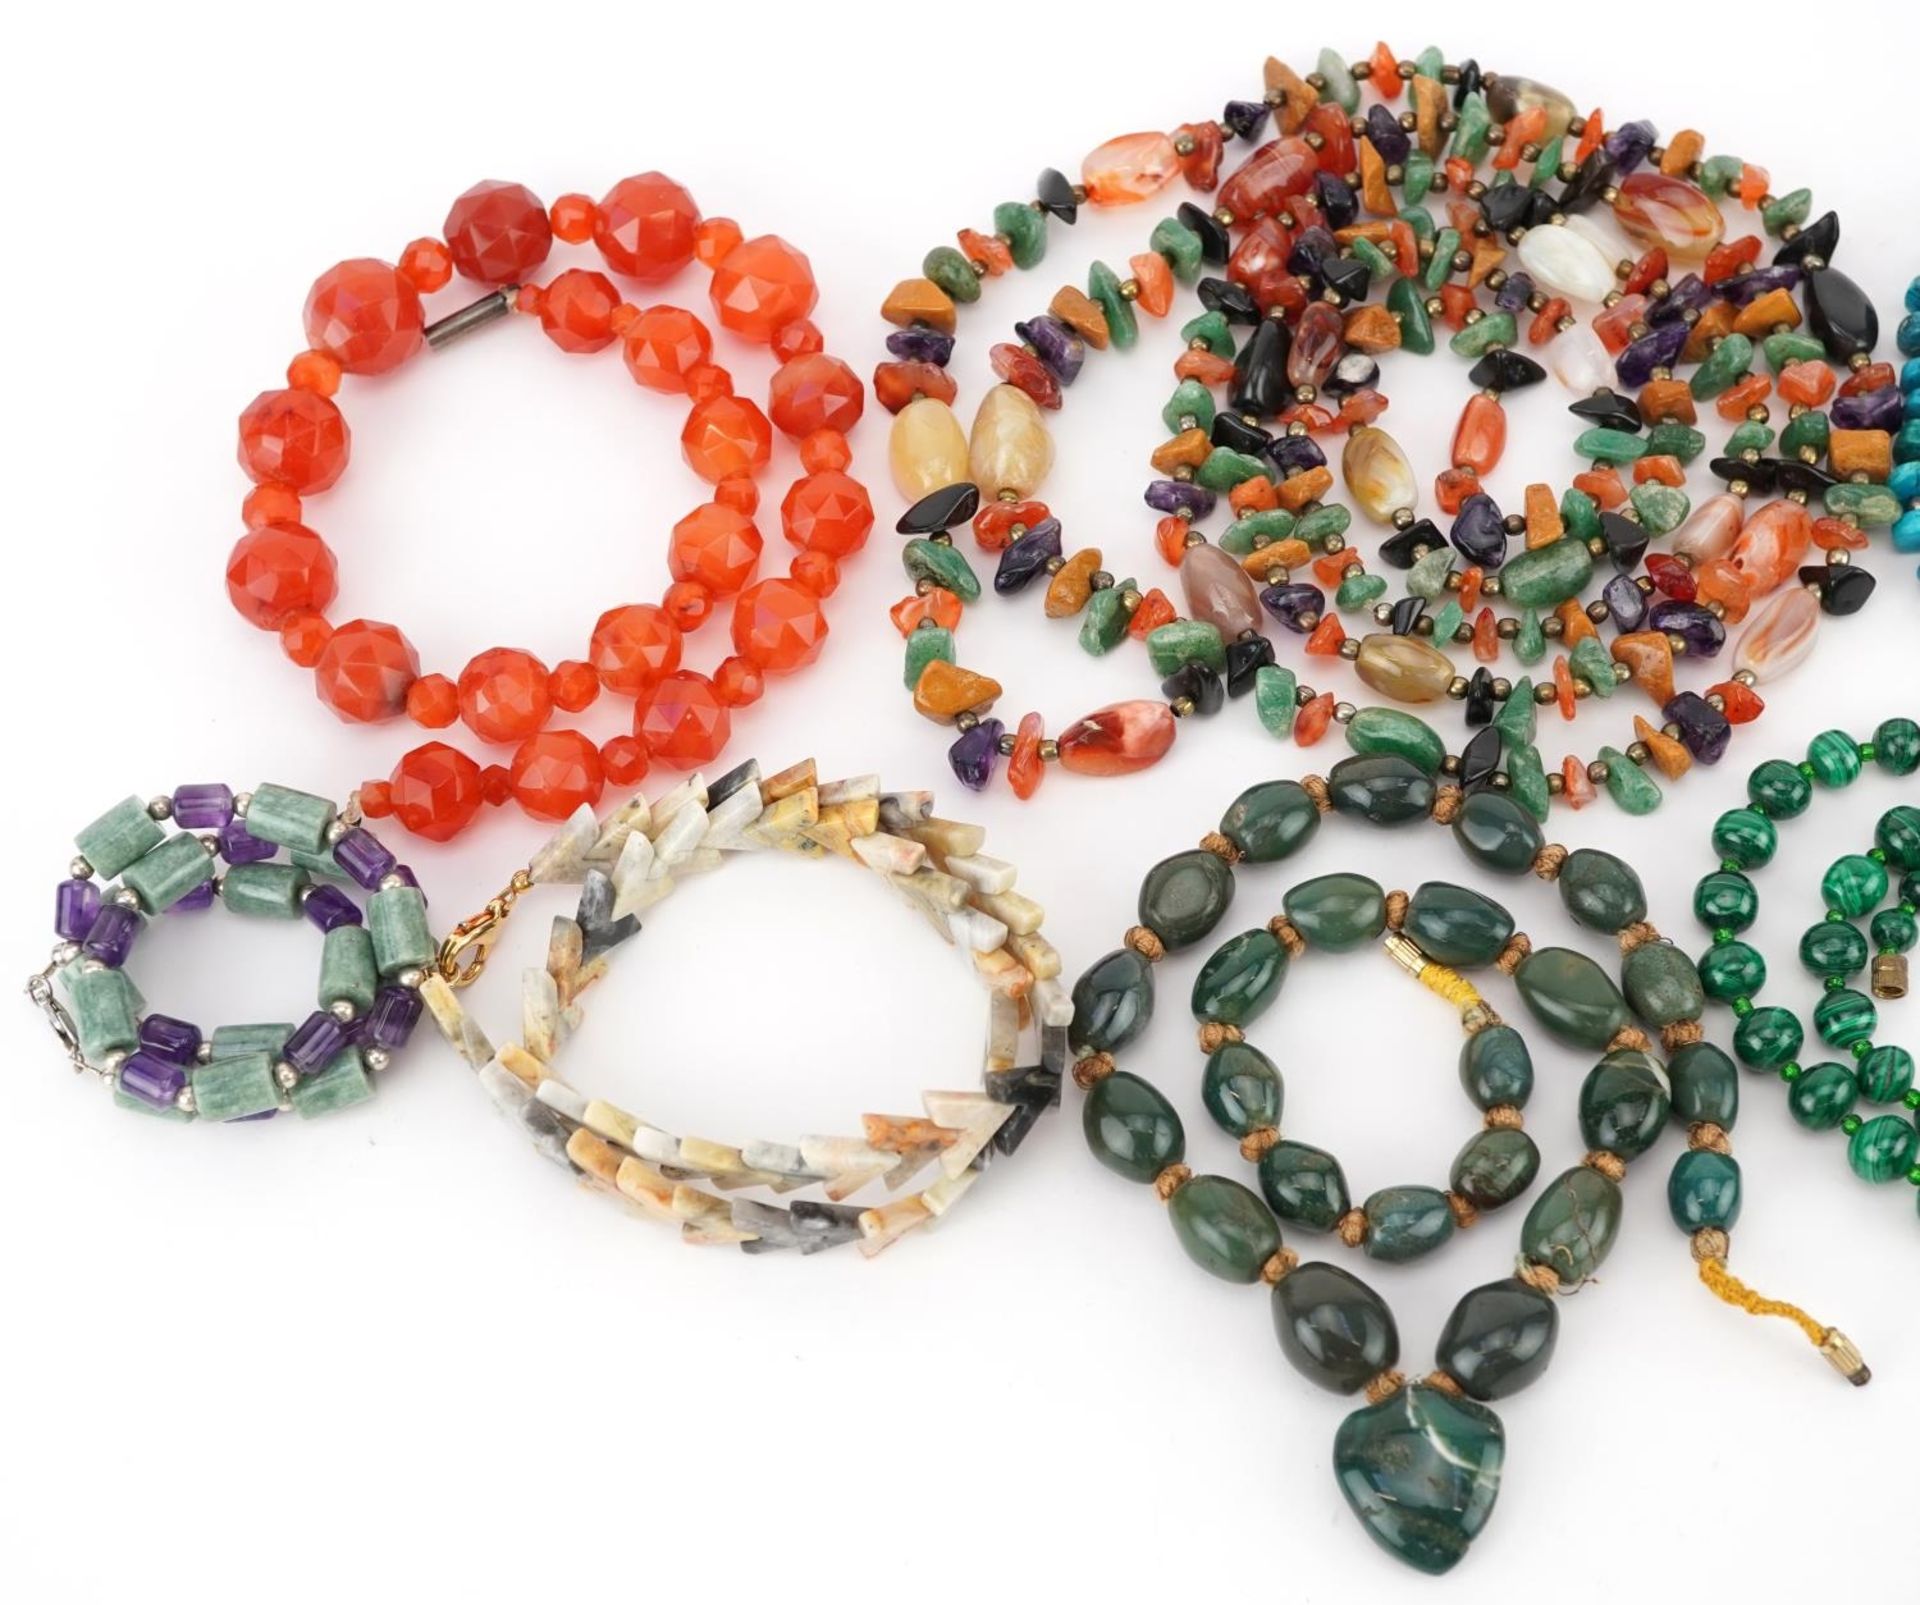 Semi precious stone jewellery comprising eight necklaces and three pendants including carnelian, - Image 2 of 3